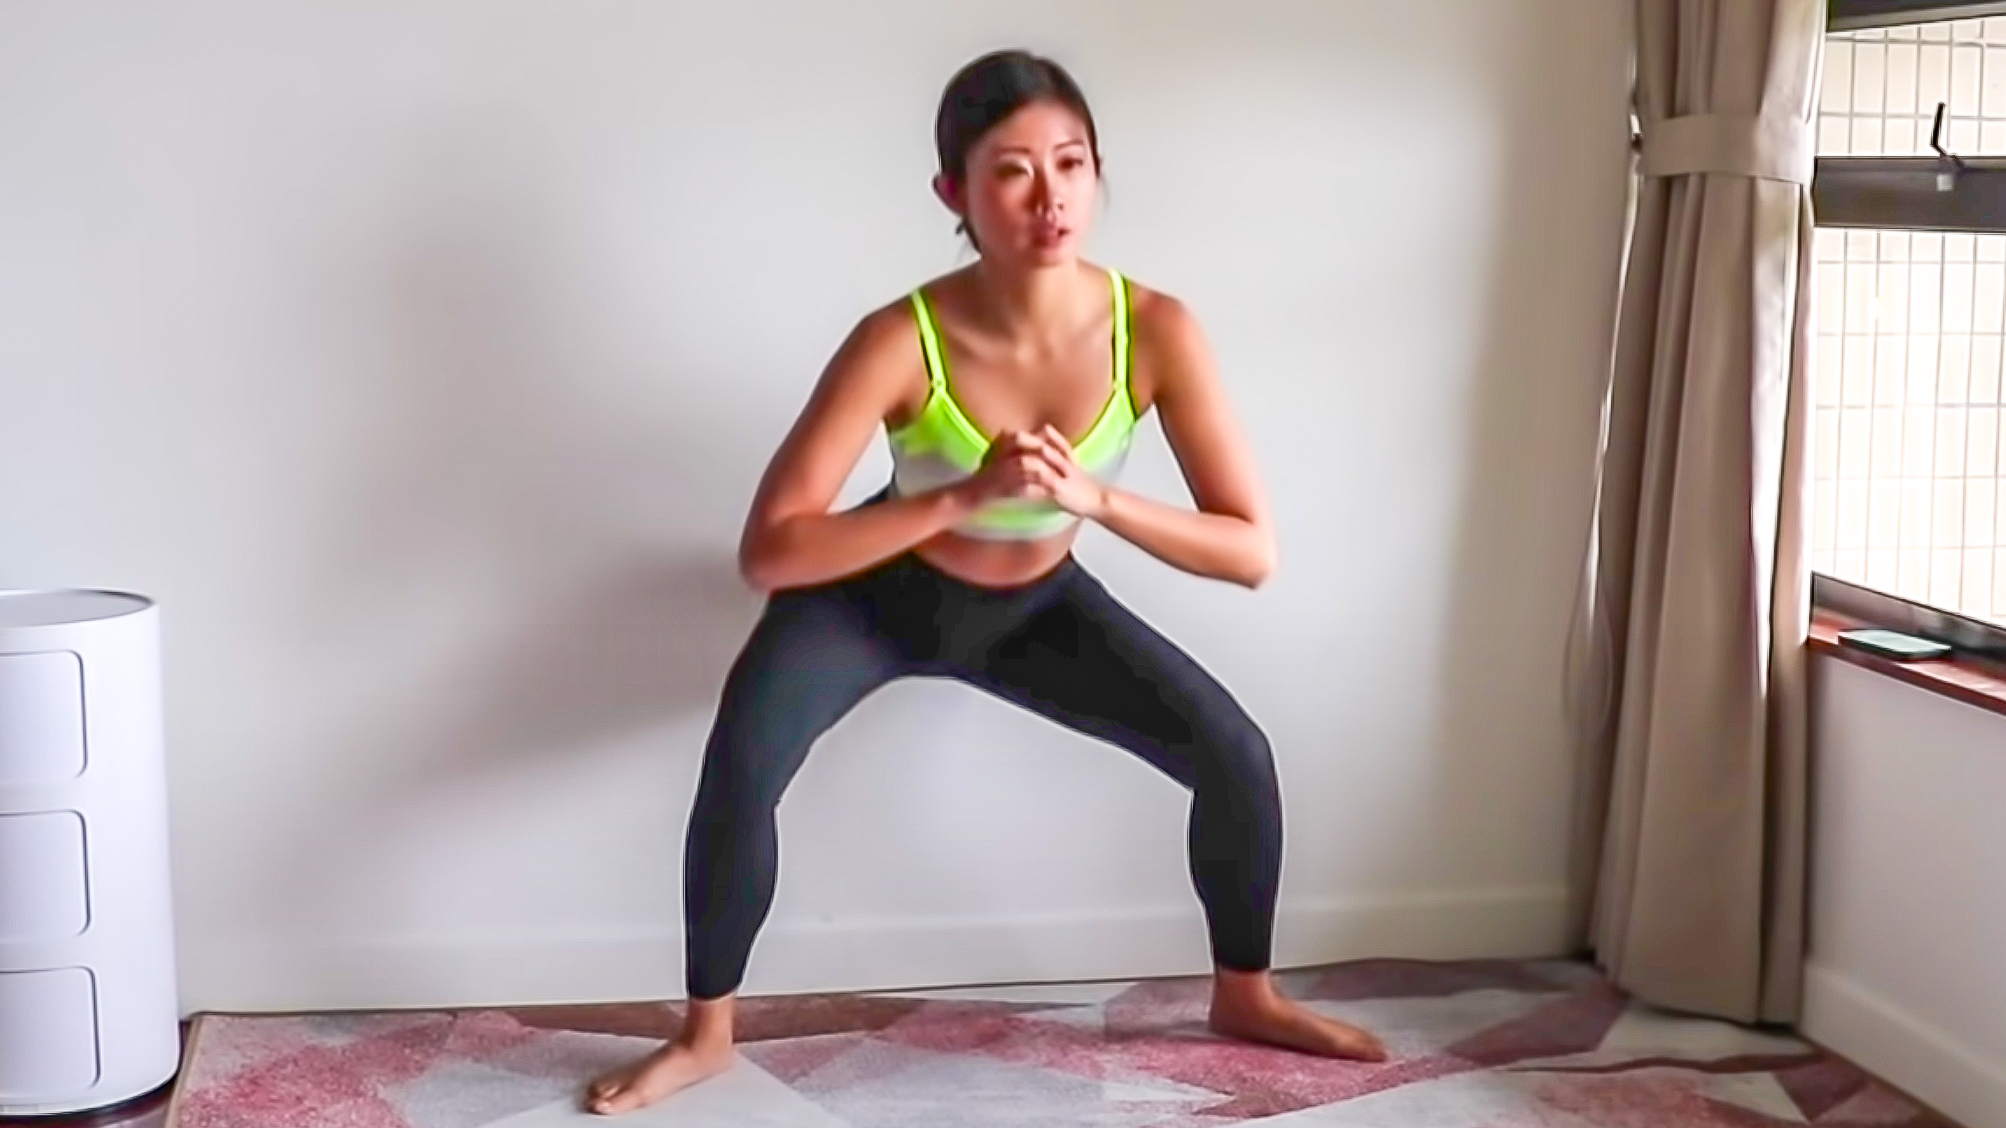 I tried the Emi Wong Slim Legs in 20 days workout — here's what